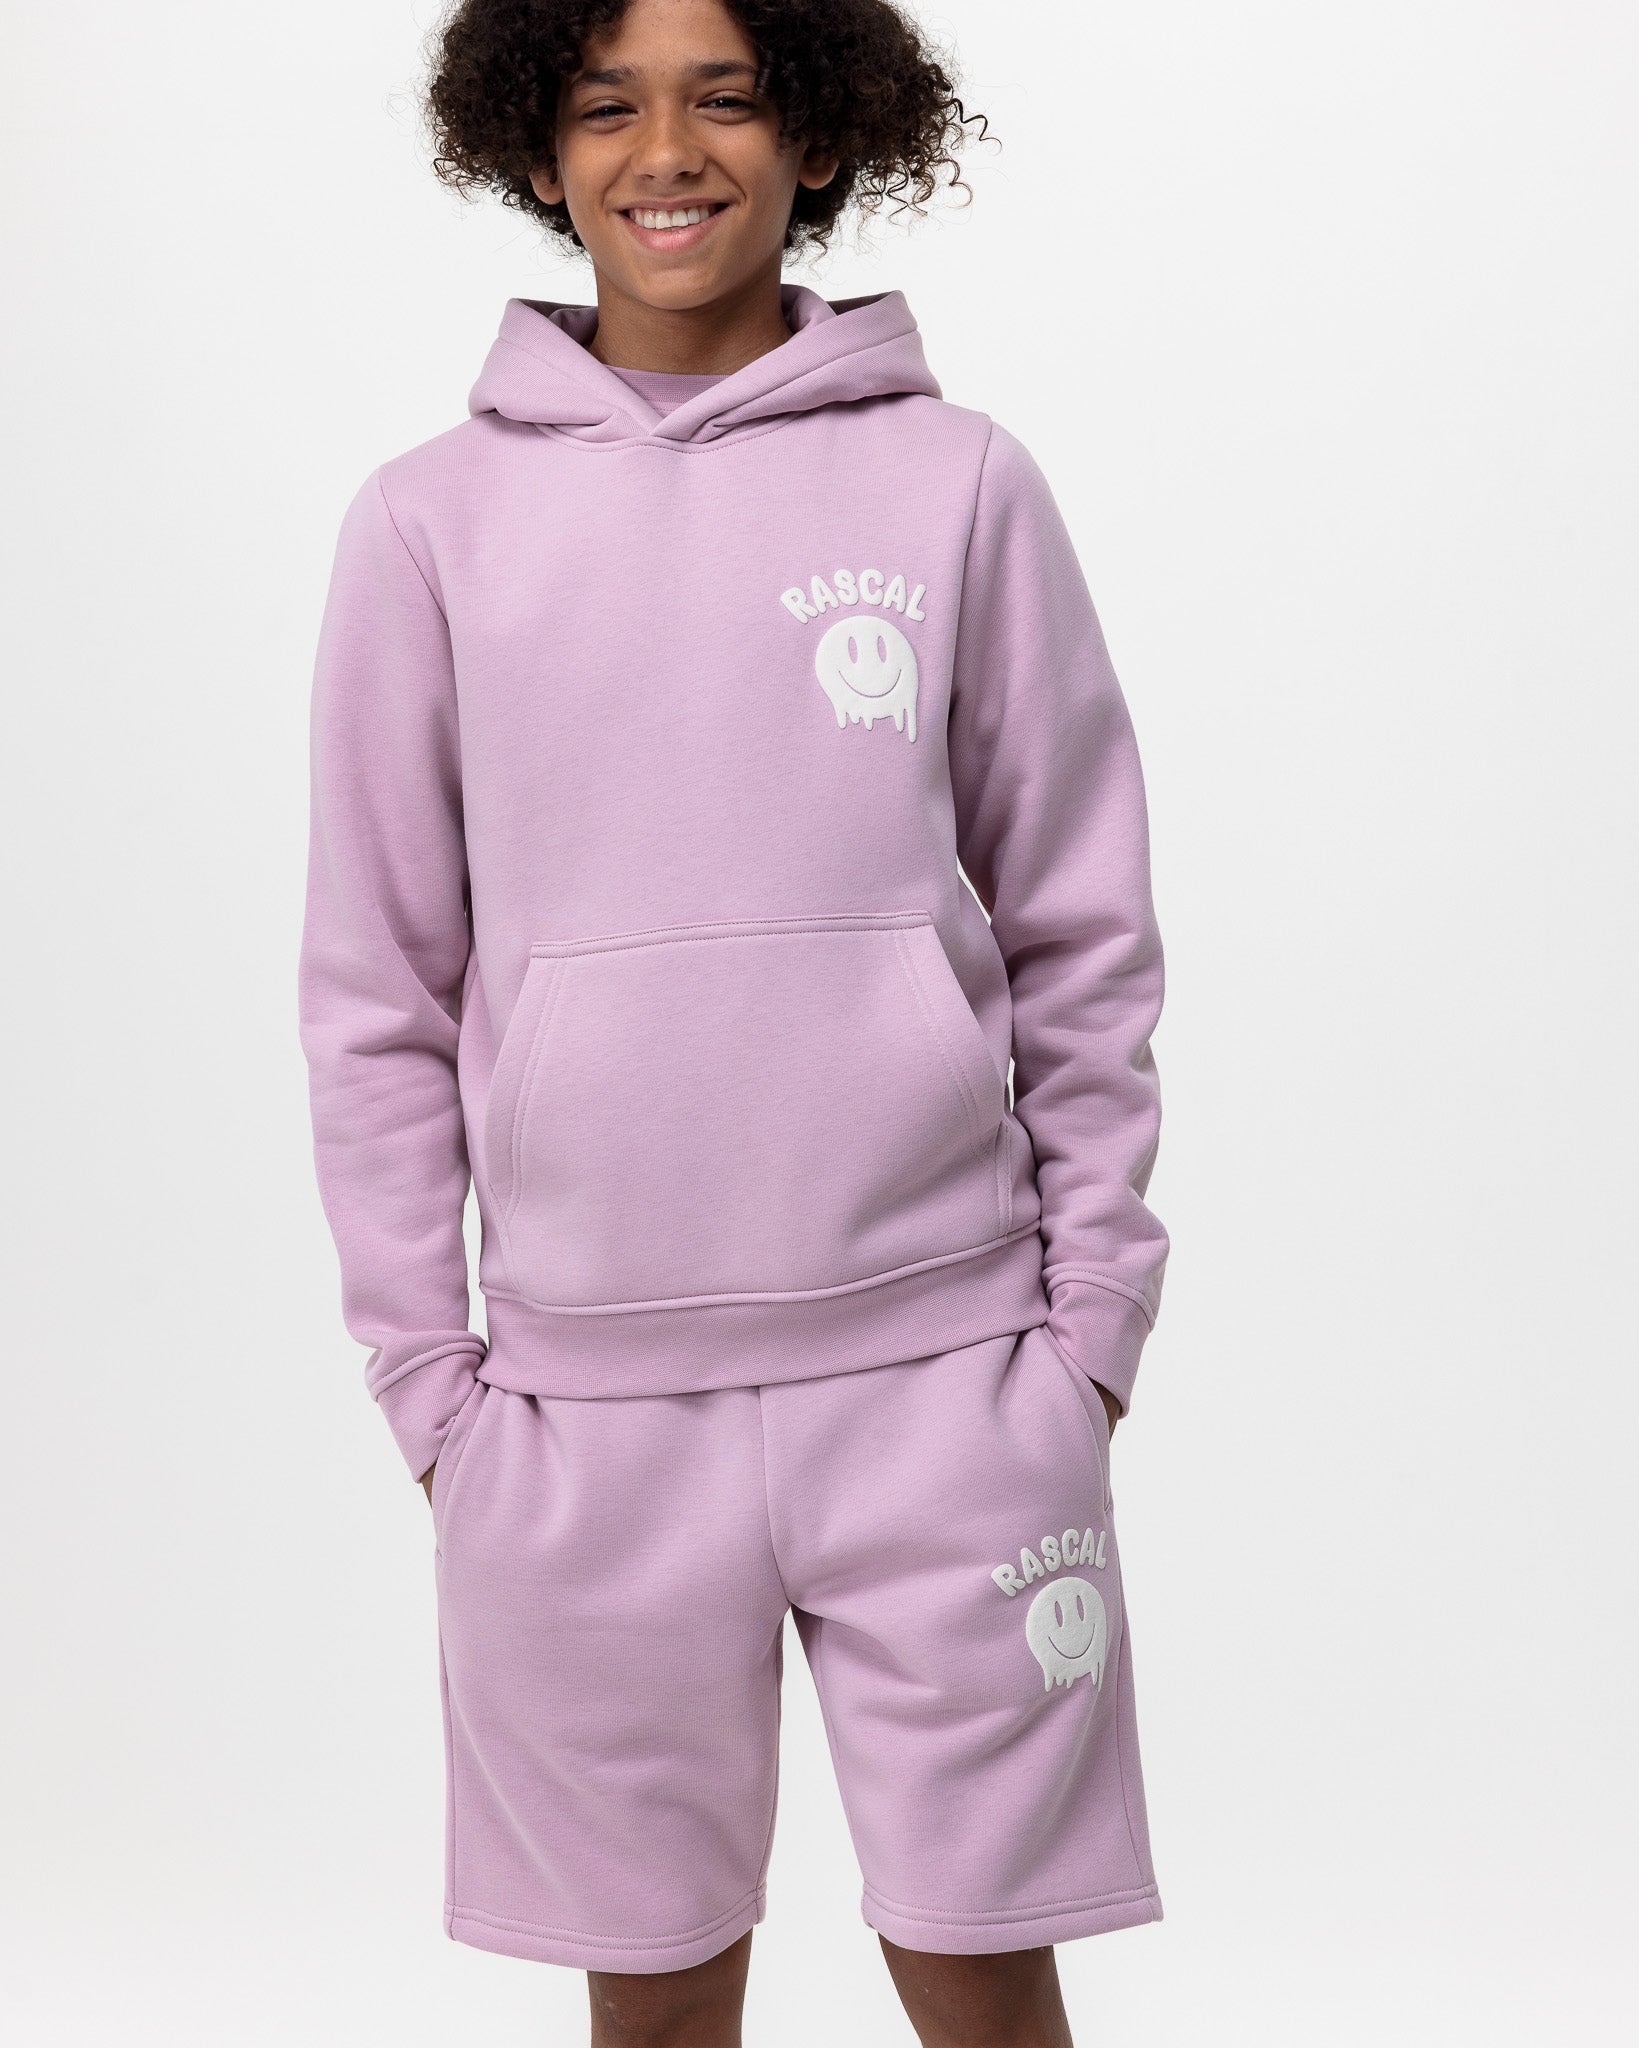 boy wearing pink smiley hoodie and pink smiley face shorts